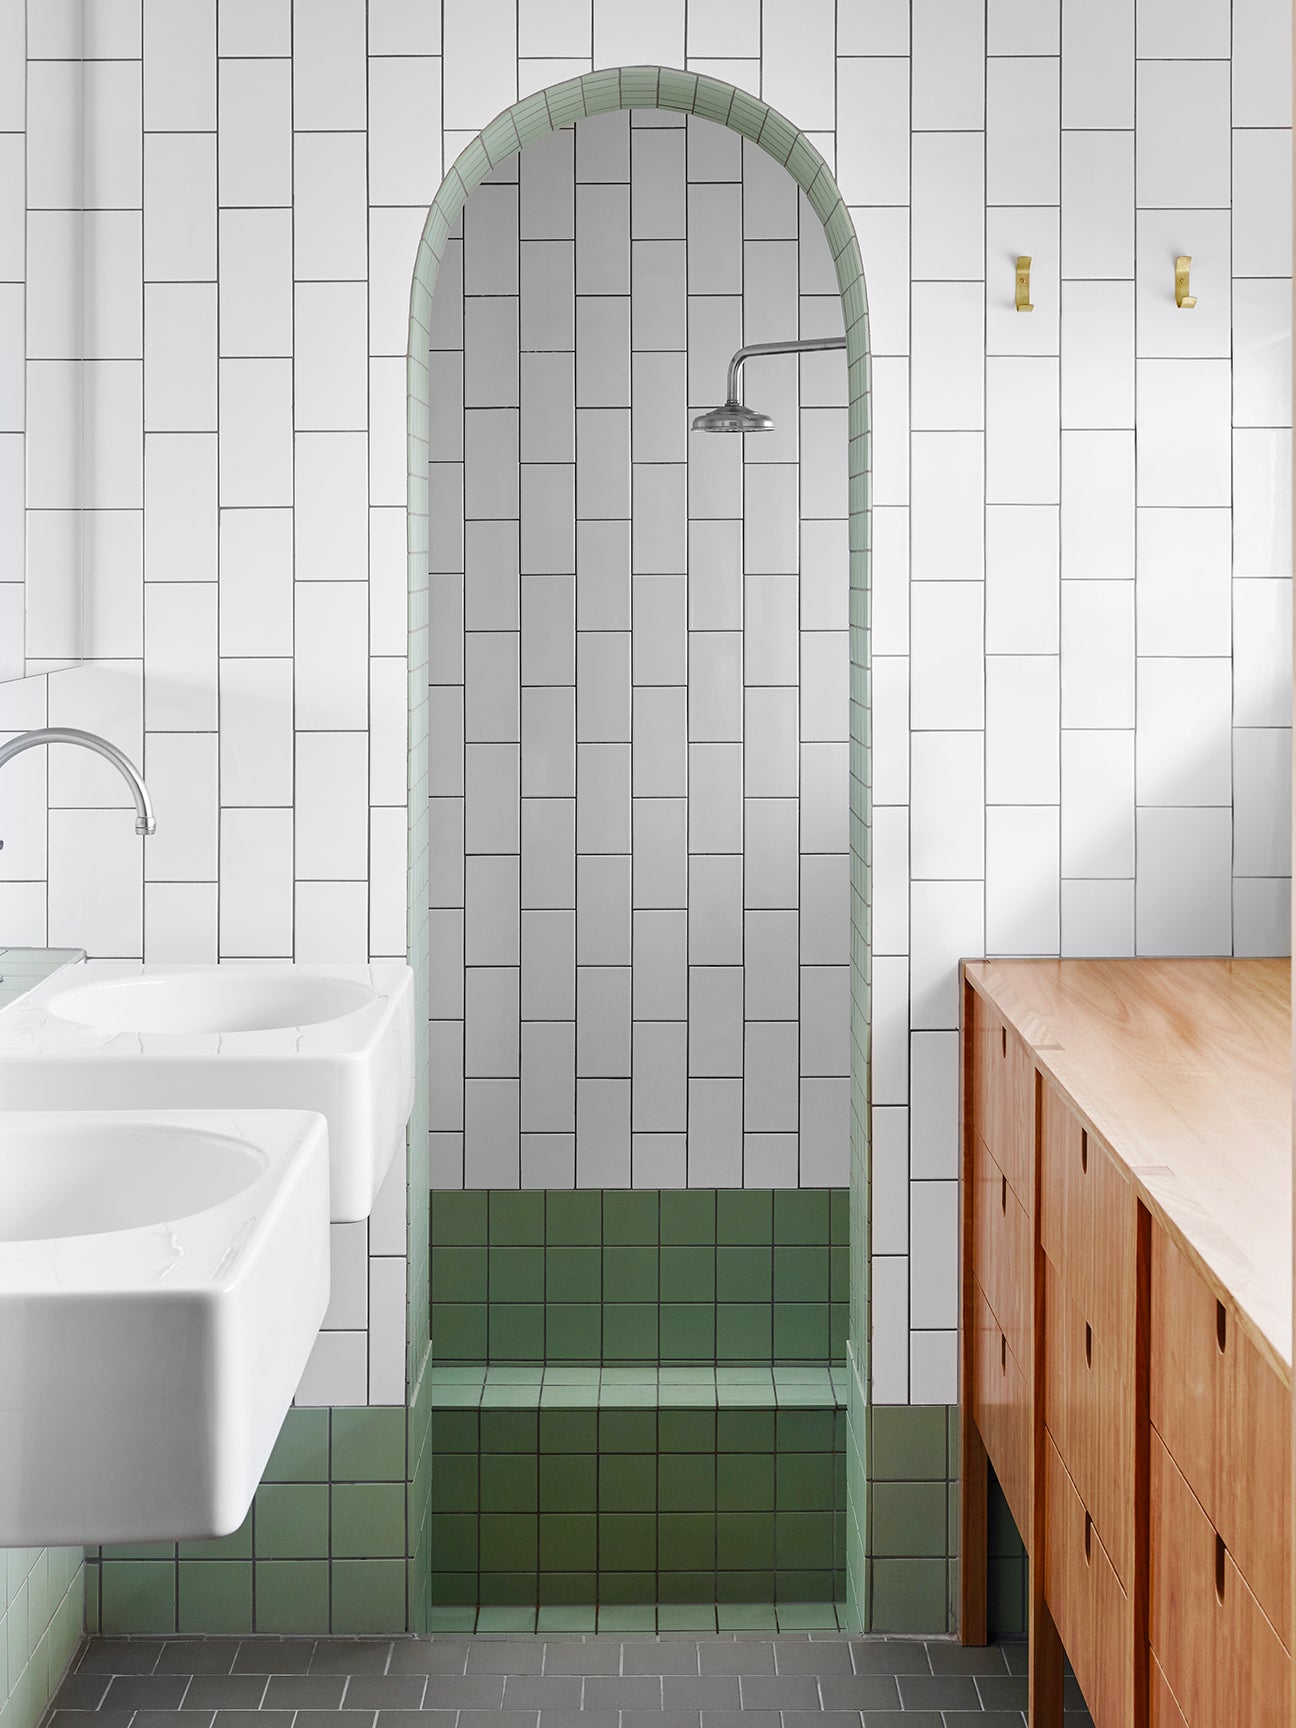 Instead of Glass Shower Doors, Try an Archway in a Small Bathroom